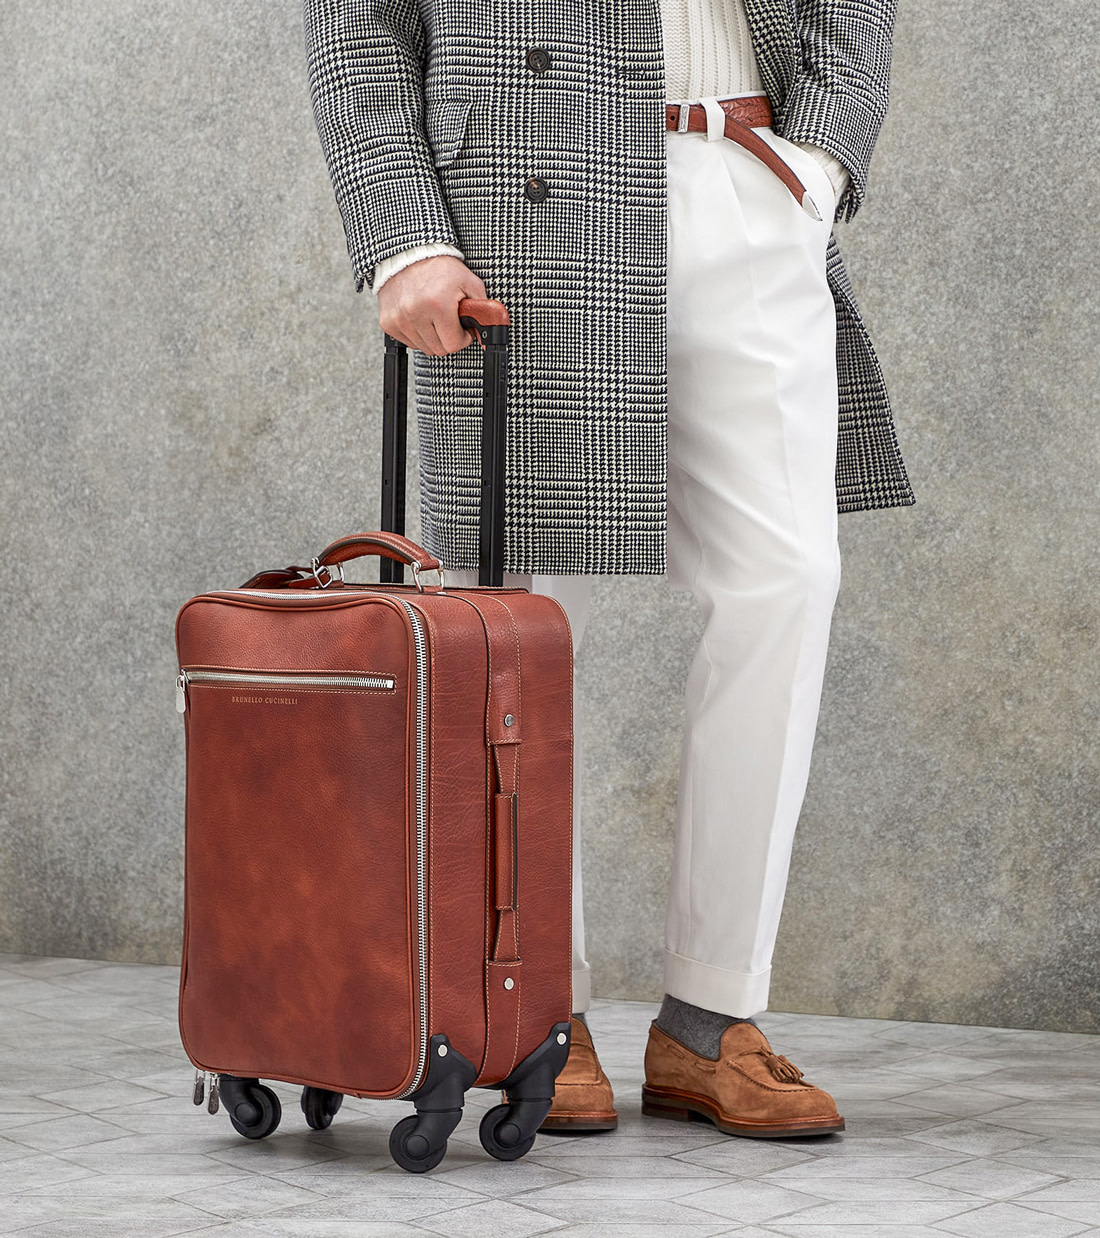 12 Stylish Suitcases That Will Make You Stand Out in Any Airport